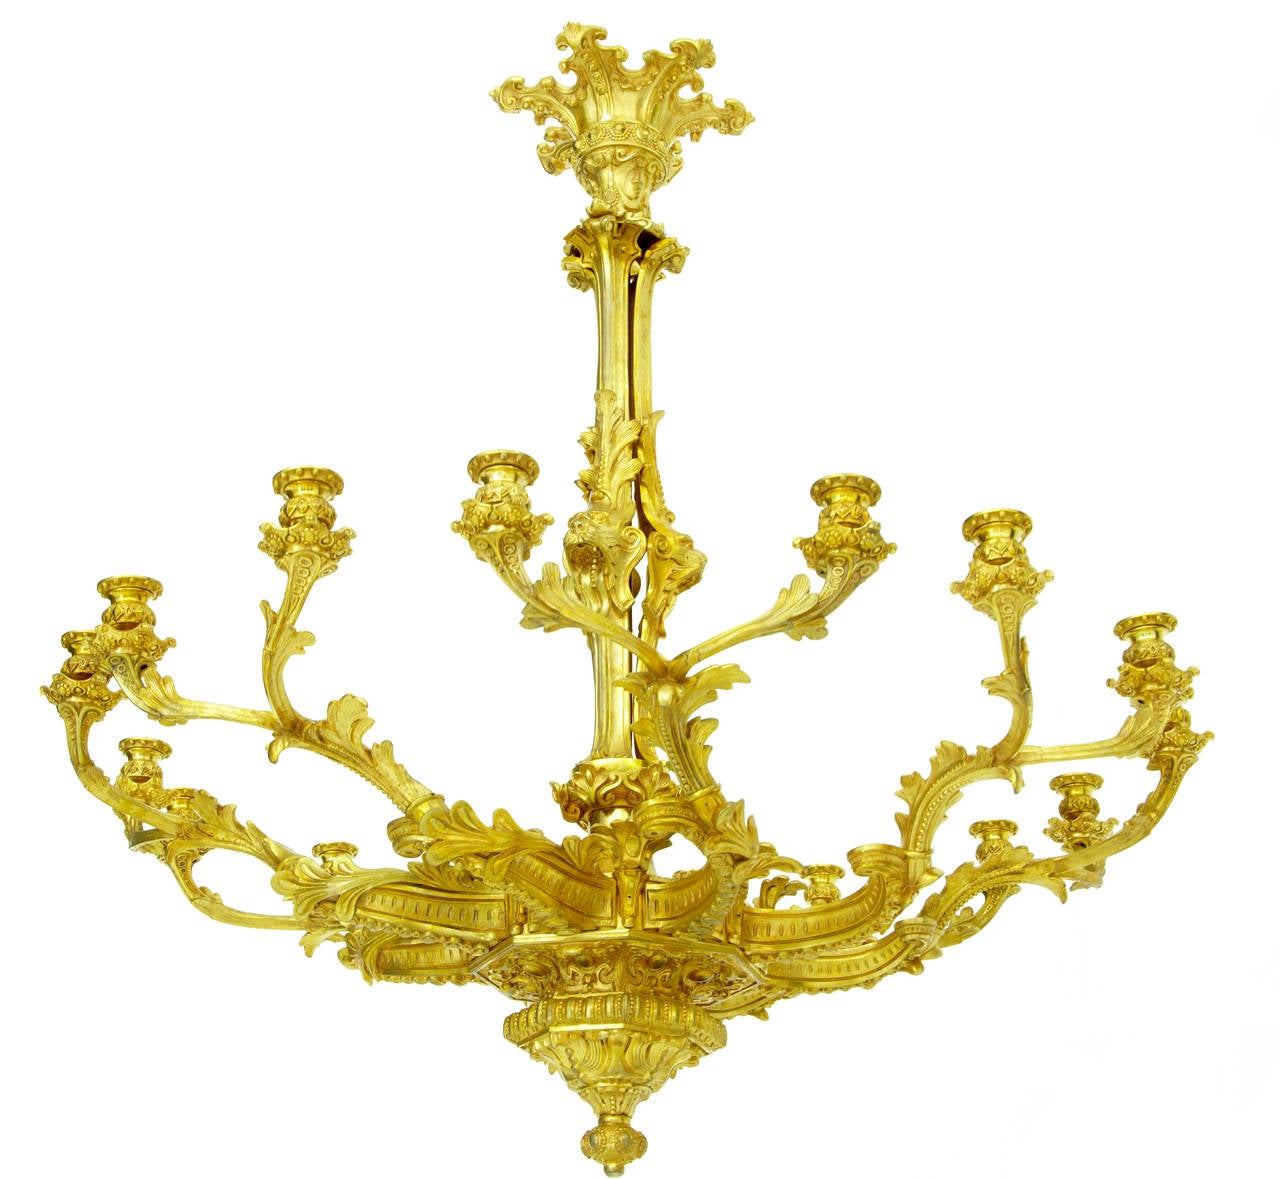 Chandelier of the finest quality, circa 1880.
French made ormolu with mercury gilding.
8 arms which hold 2 candles each, 16 in total.
Has been previously wired for electrical use but wires no longer present.

Measures: Height drop 38